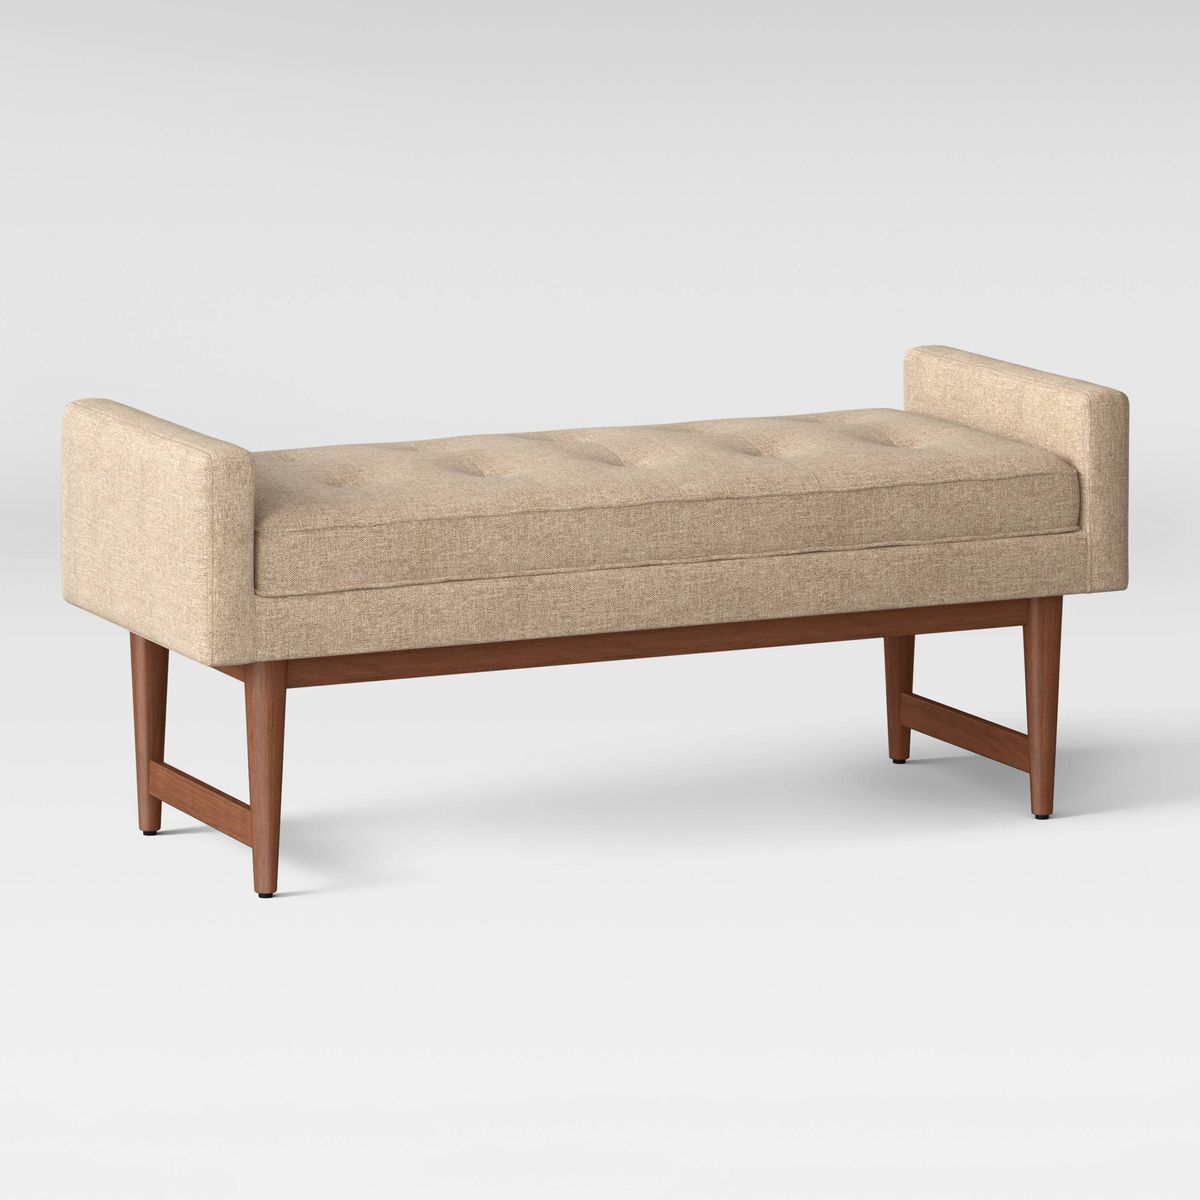 target project midcentury inspired furniture line launches curbed patio storage accent table verken modern settee bench steel bedside weber grill side home accessories farmhouse